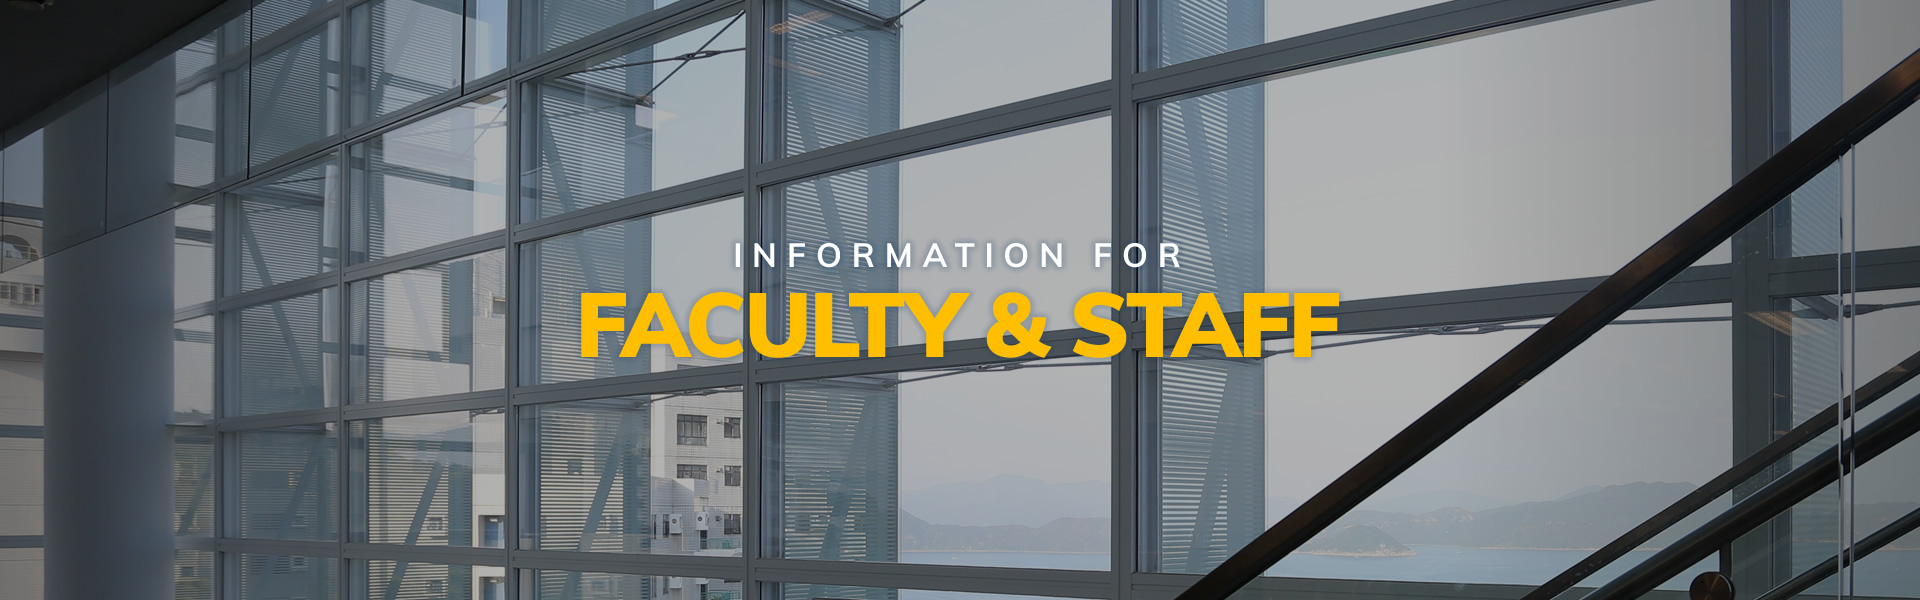 Information for Faculty and Staff